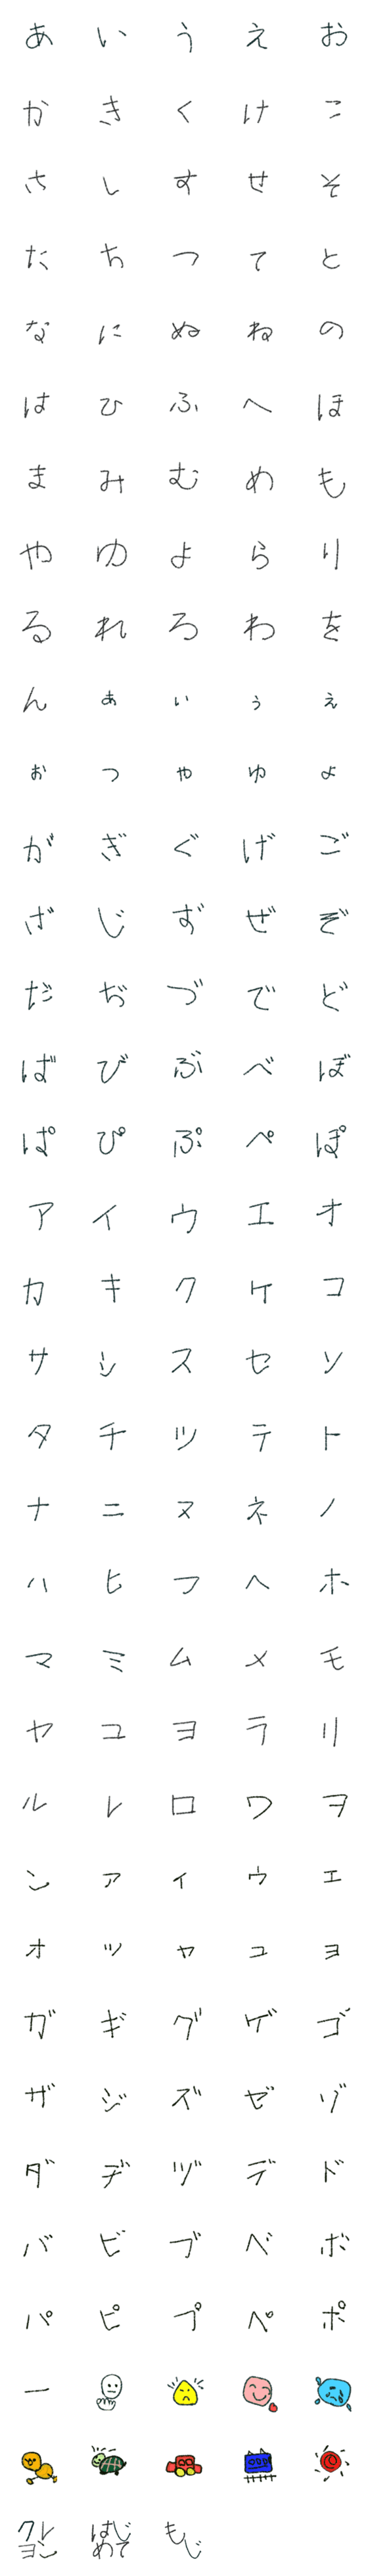 [LINE絵文字]初めてのクレヨン文字と絵の画像一覧